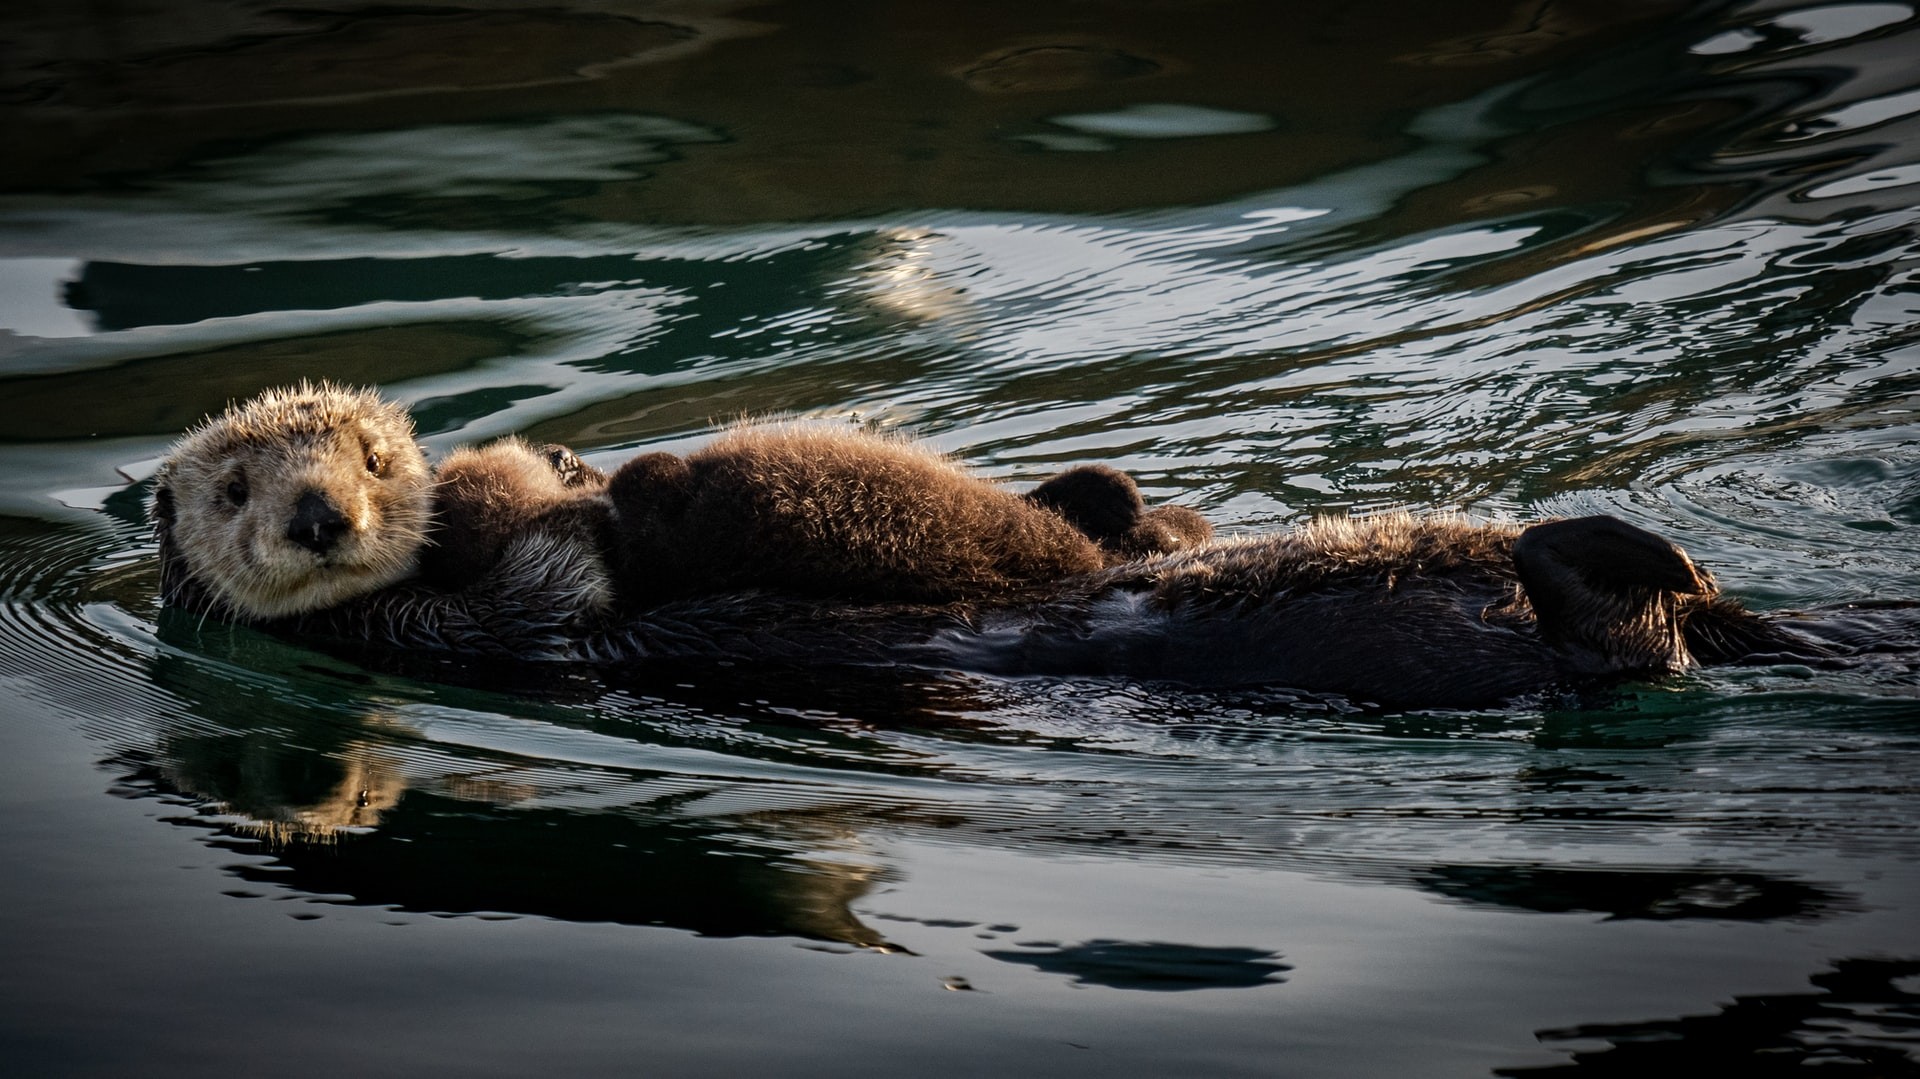 A sea otter plays in the water.